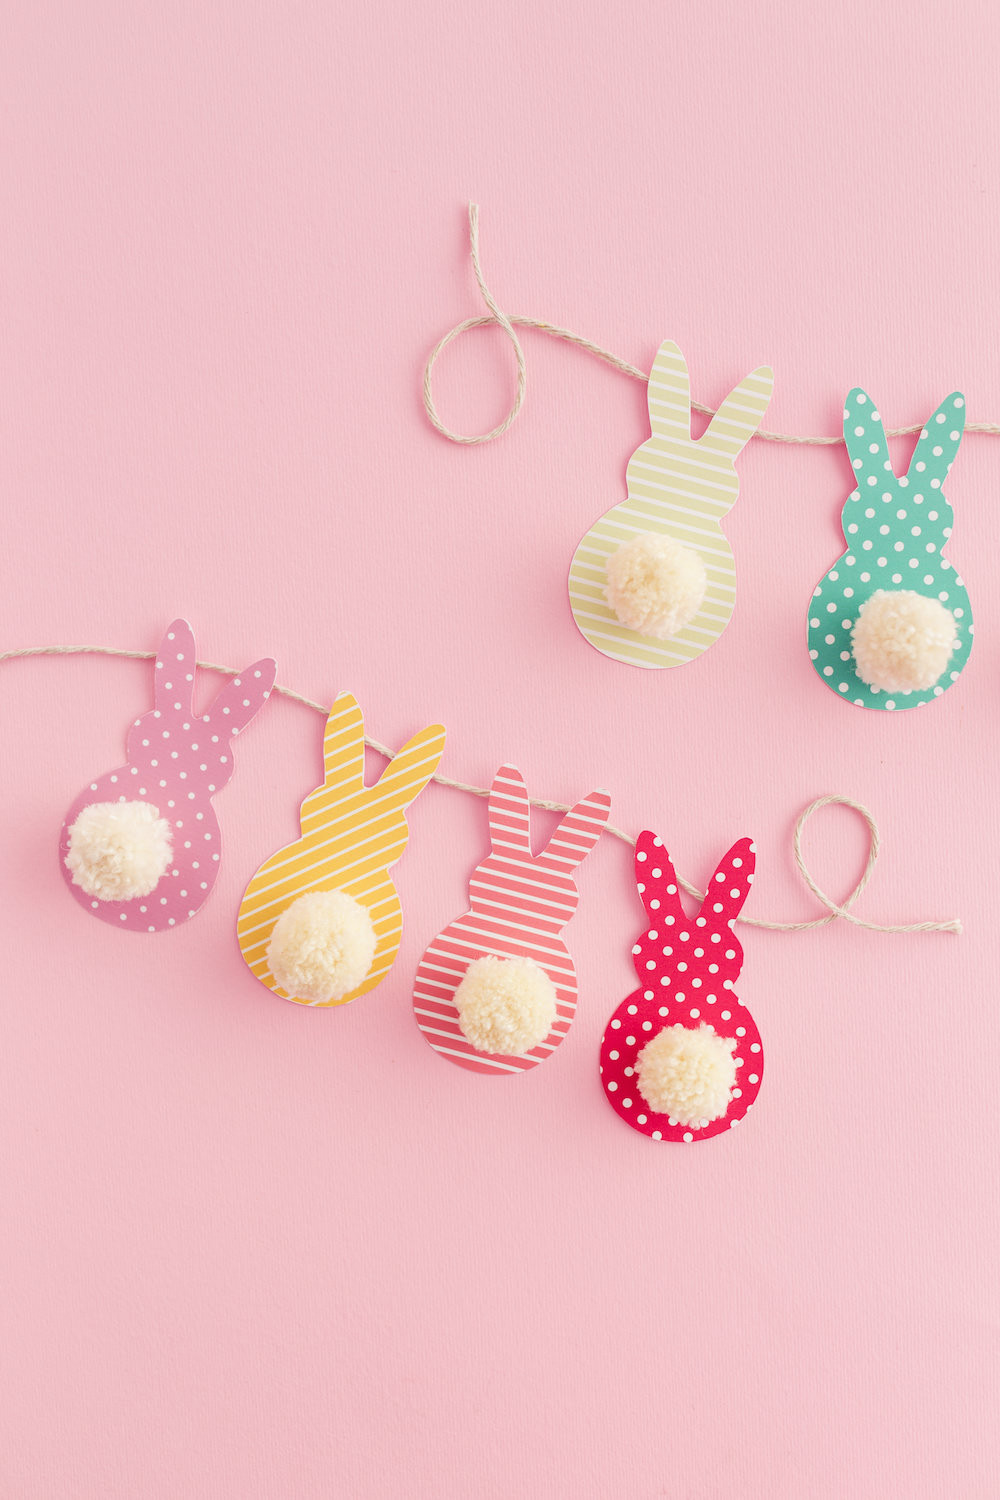 DIY Easter Crafts For Kids
 1001 Ideas for Easter Crafts for Kids and Parents